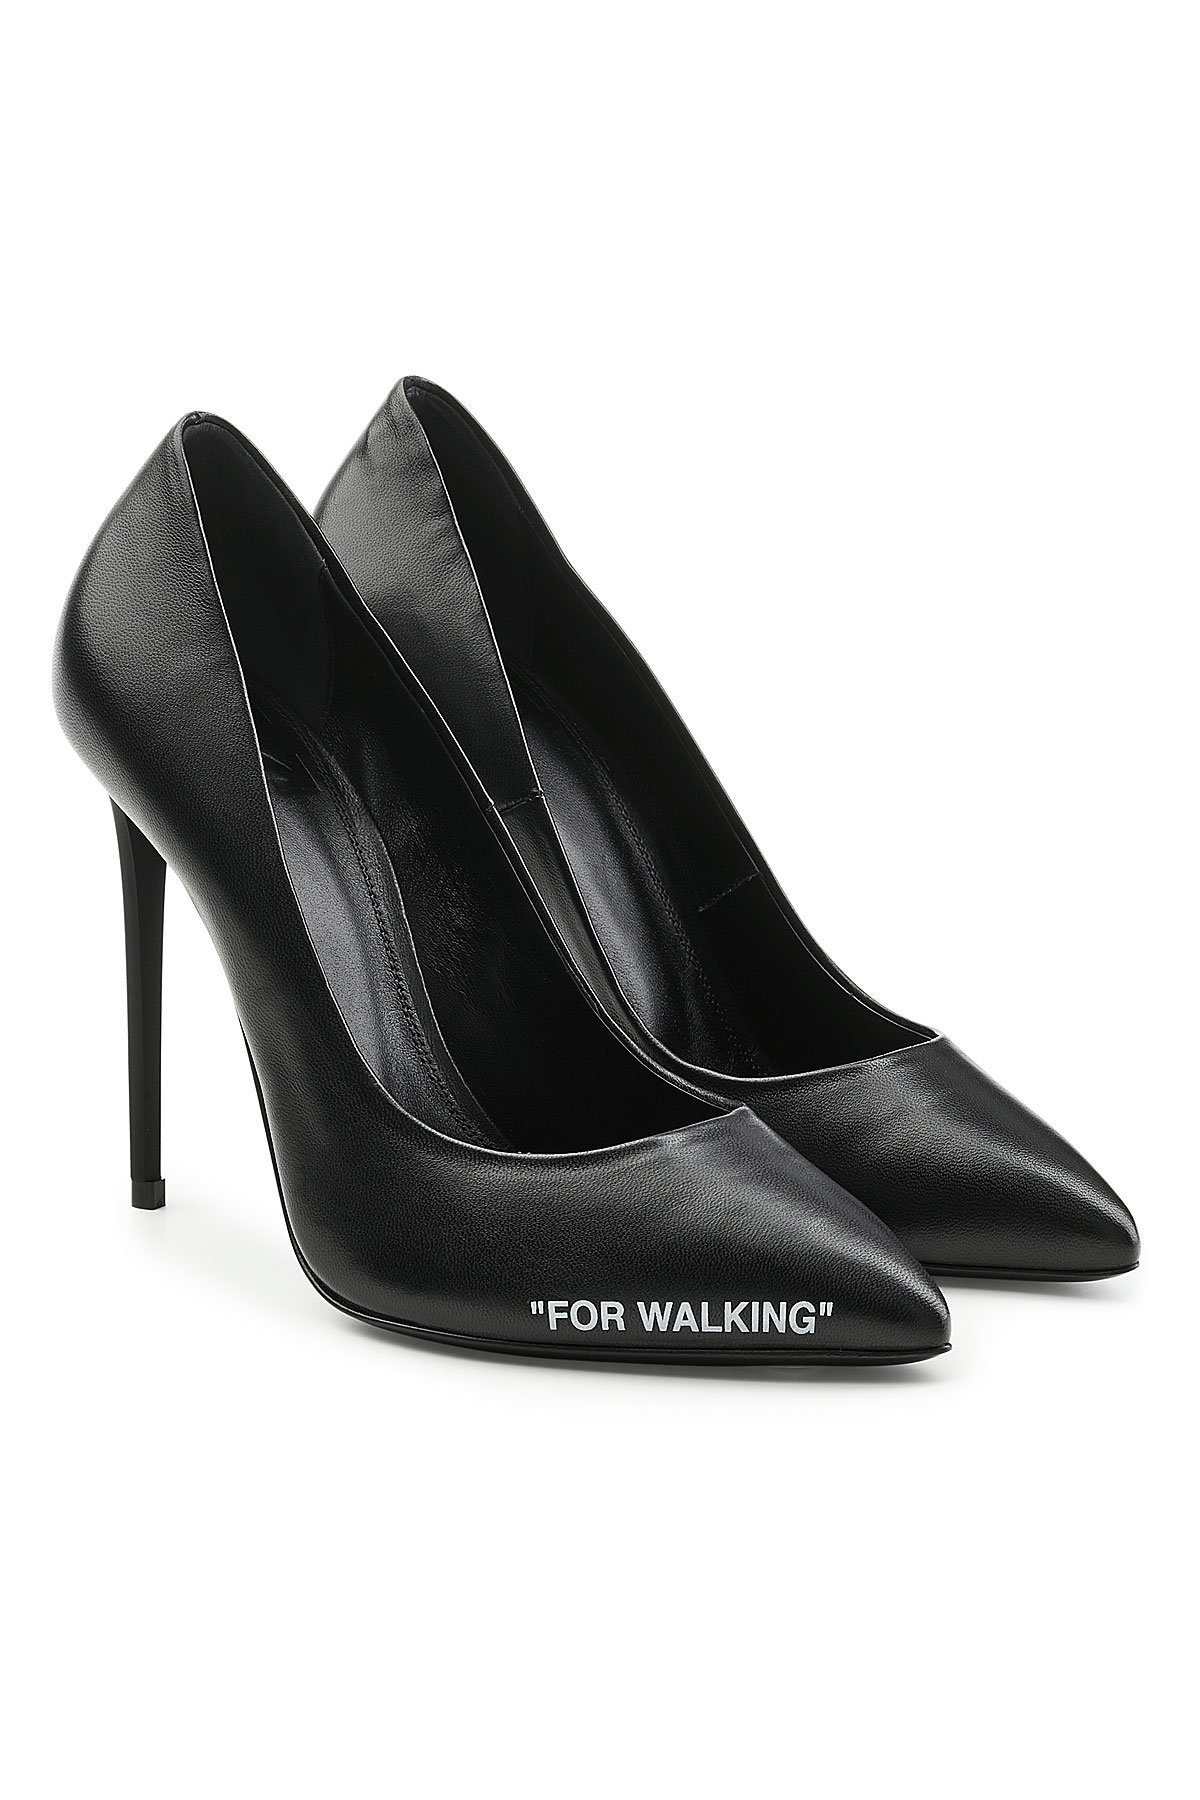 Off-White - For Walking Leather Pumps